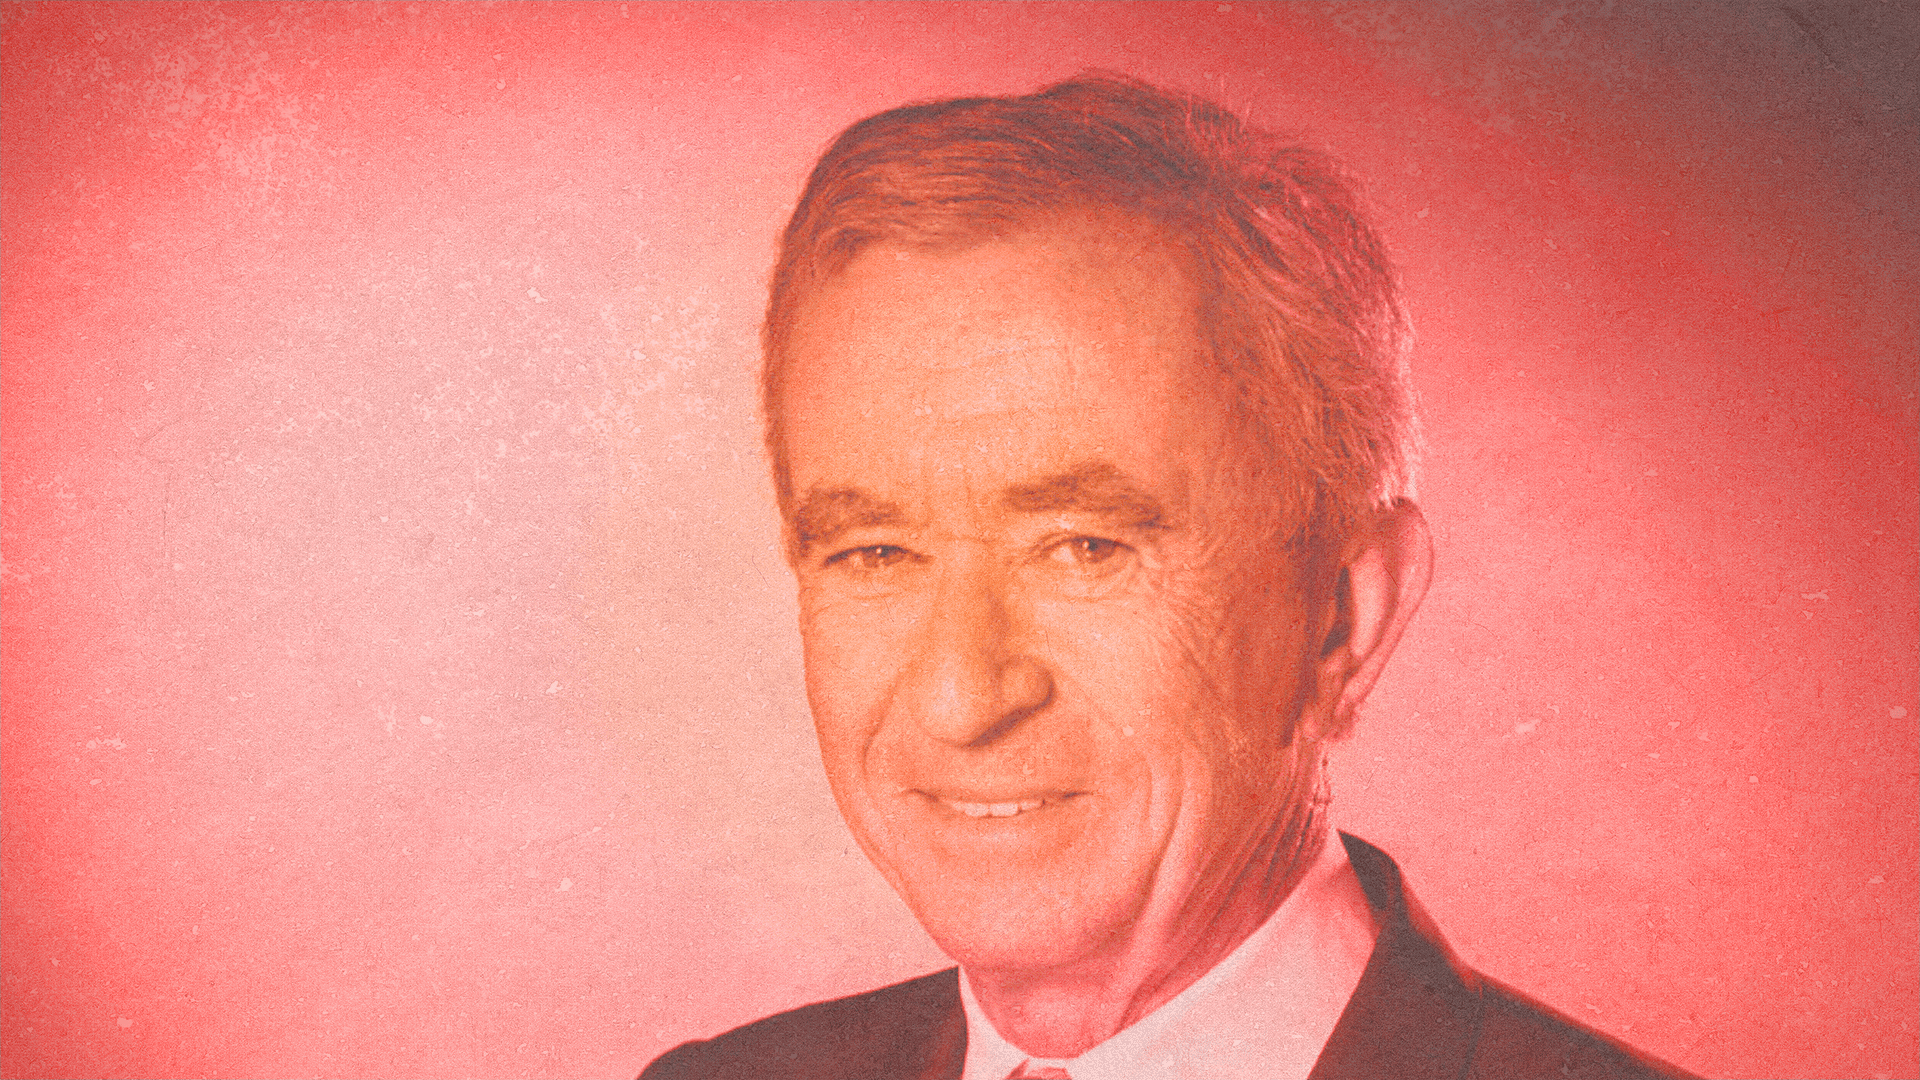 The richest man in the world is European: Who is Bernard Arnault?